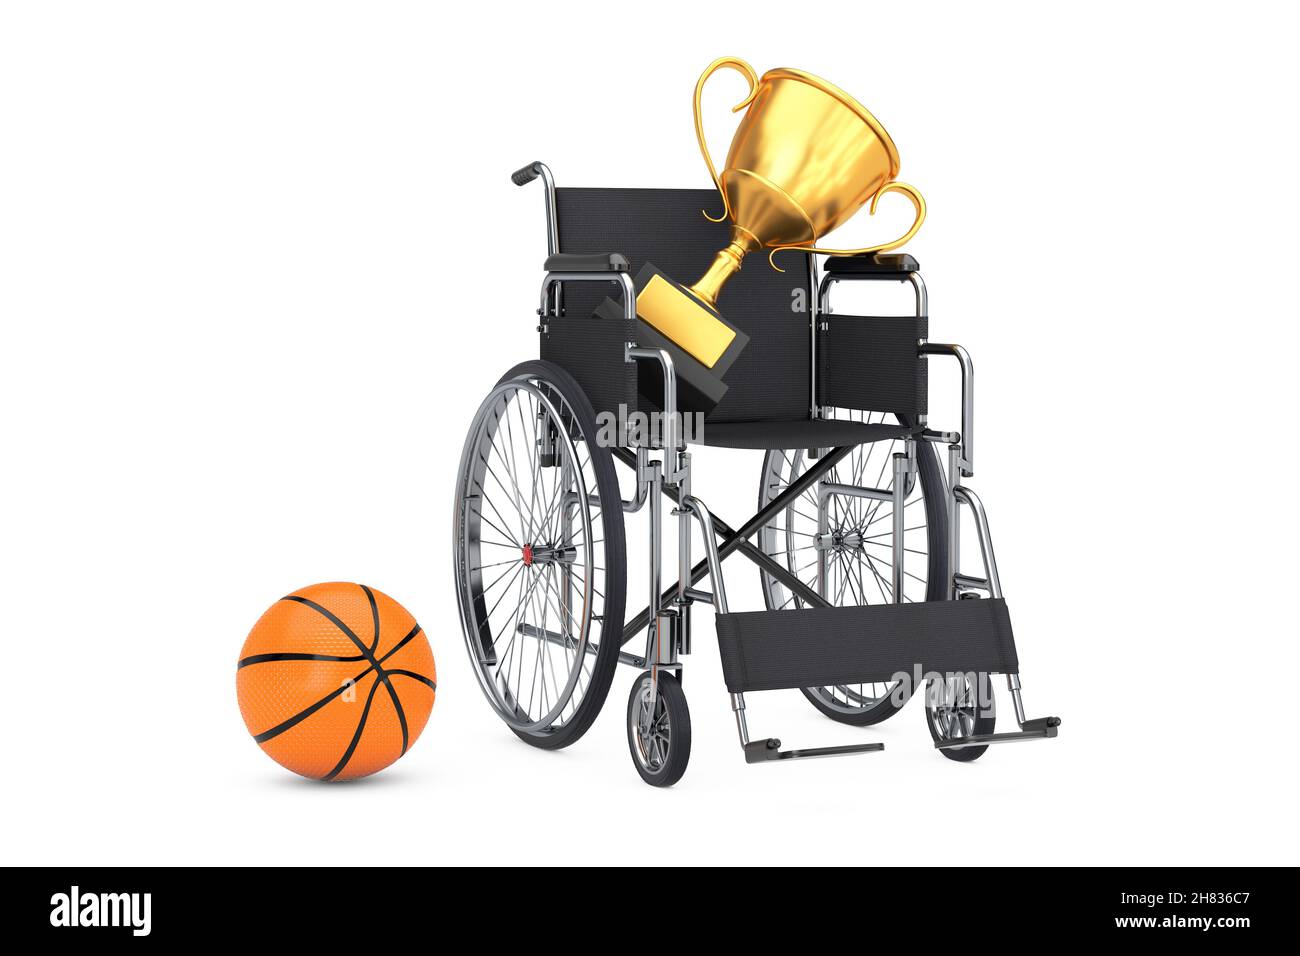 Sport Award Concept. Golden Award Trophy, Wheelchair and Basketball Ball on a white background. 3d Rendering Stock Photo